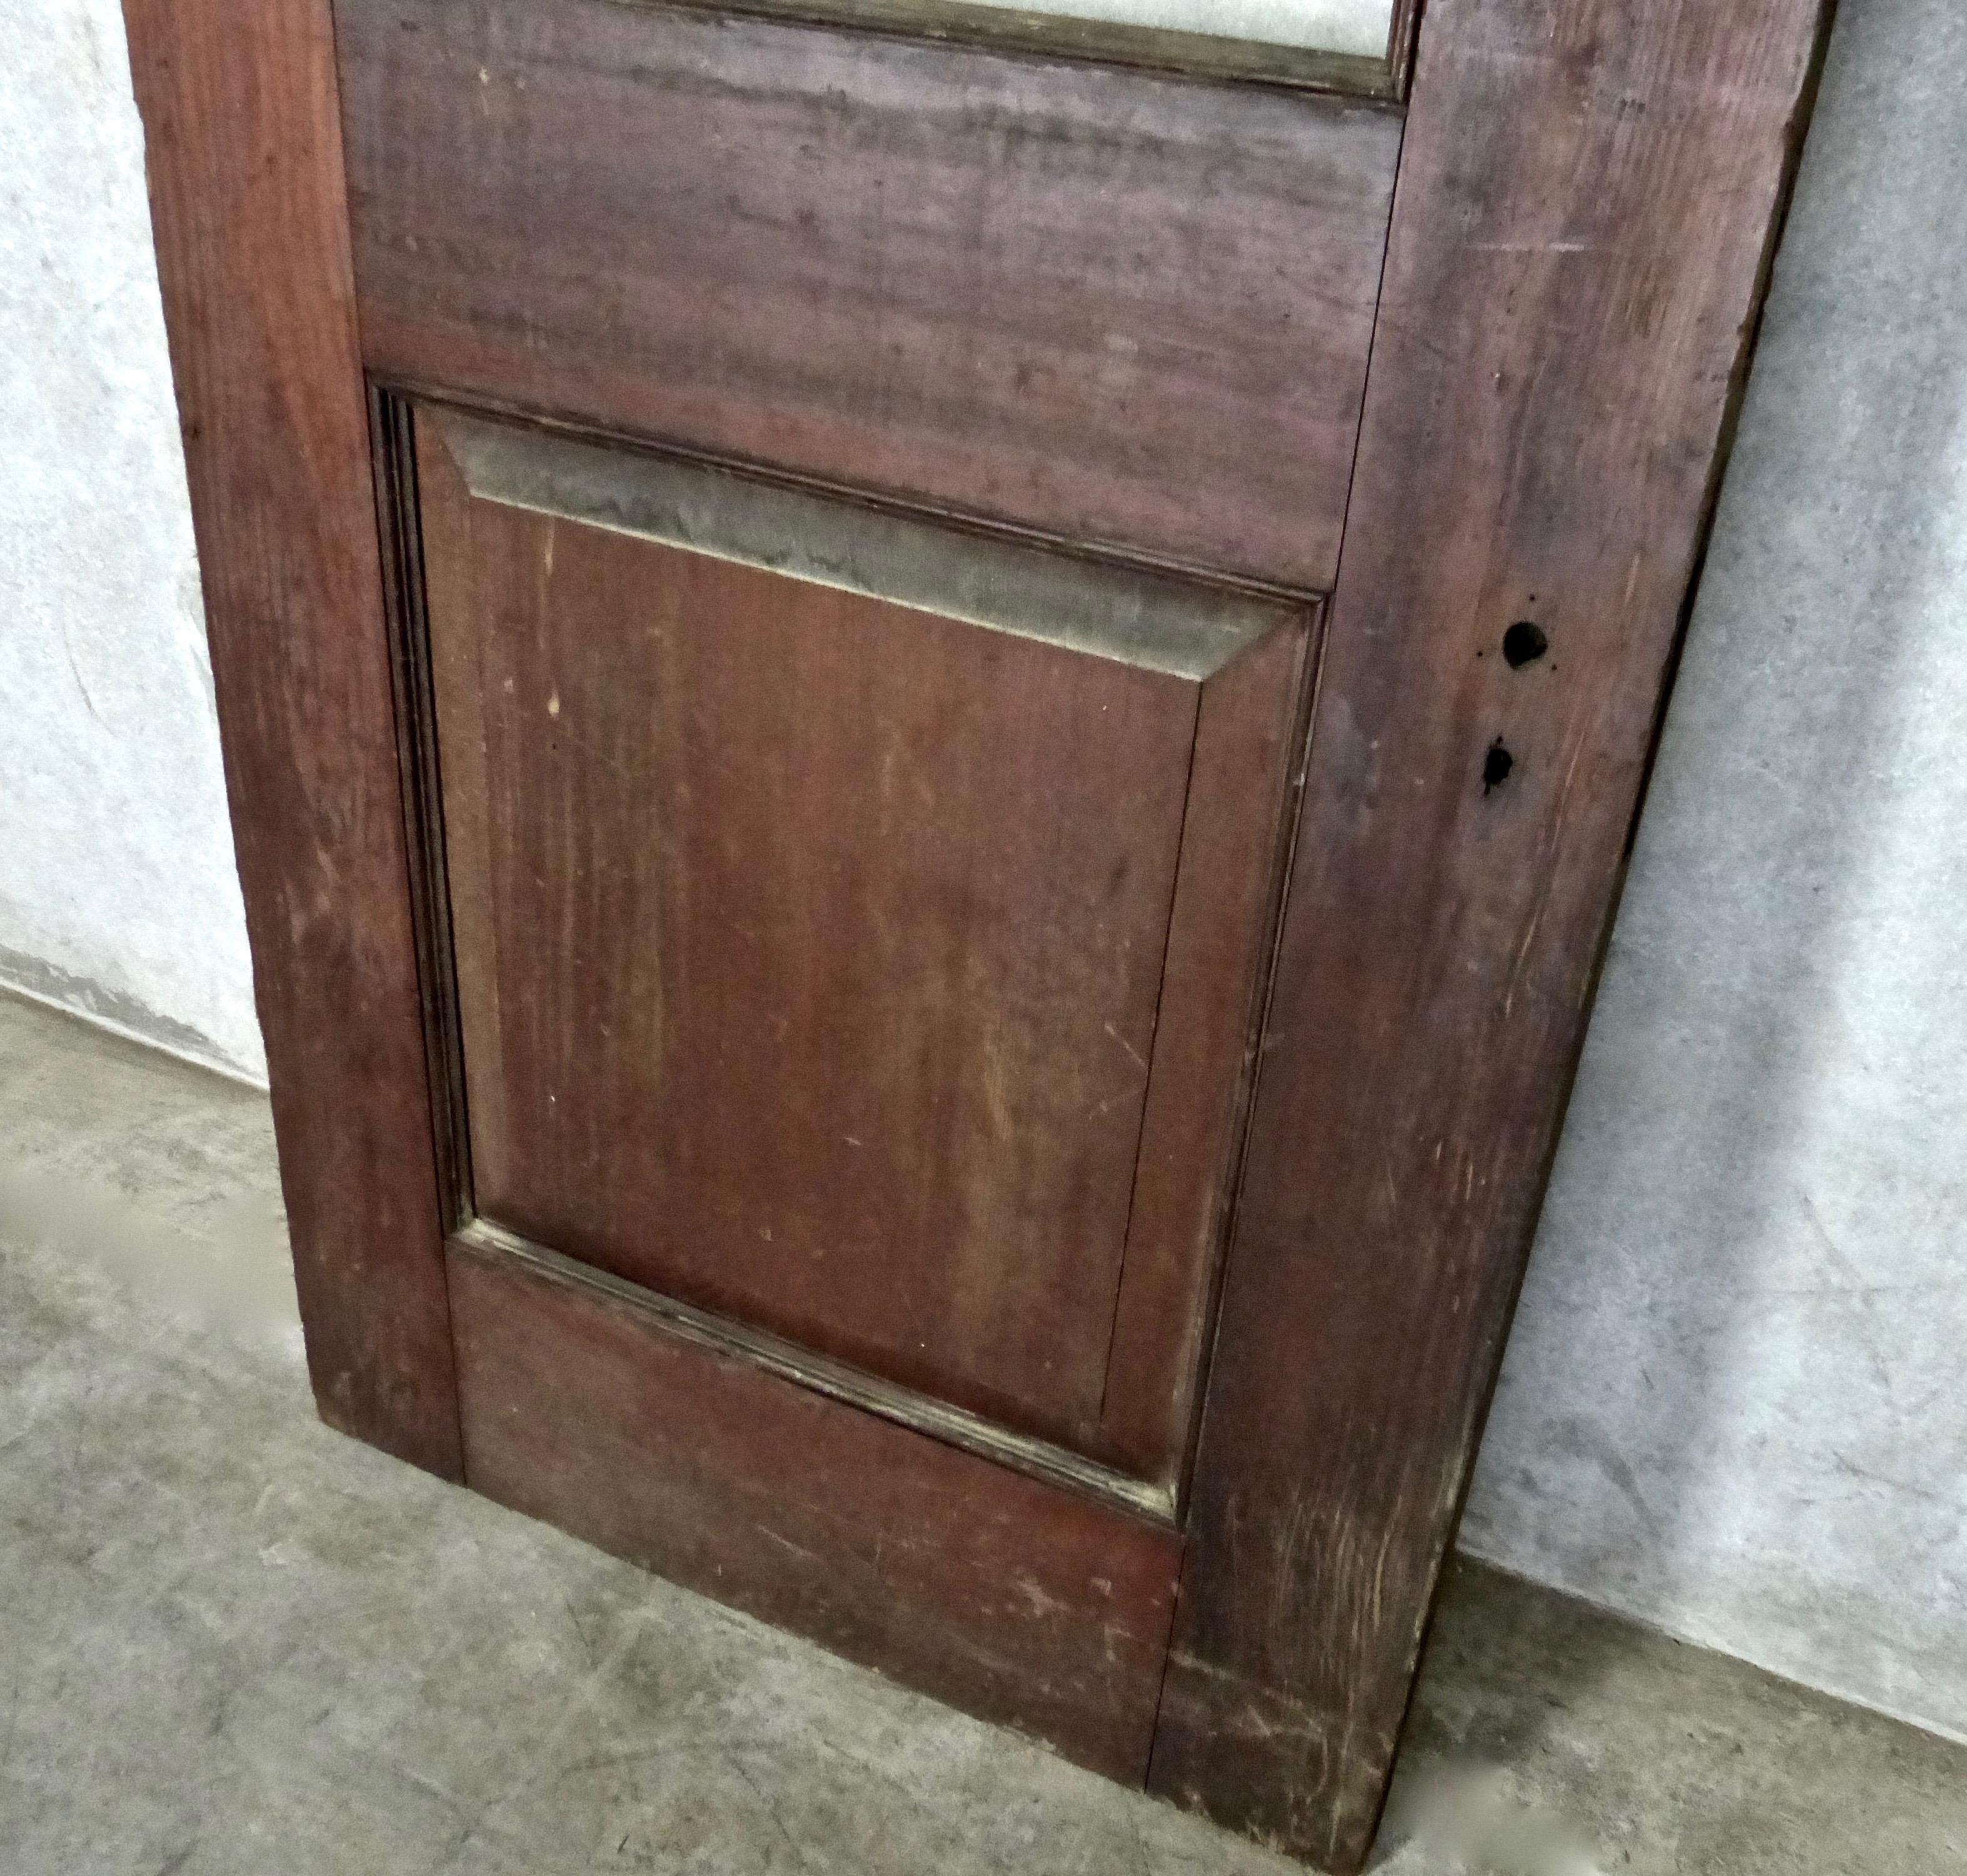 Selection of five solid fir, raised single panel wooden doors. Original suite numbers on upper panel. Original finish; awaiting your choice of glass. High quality architectural salvage from the 1890s.
Dimensions: 89